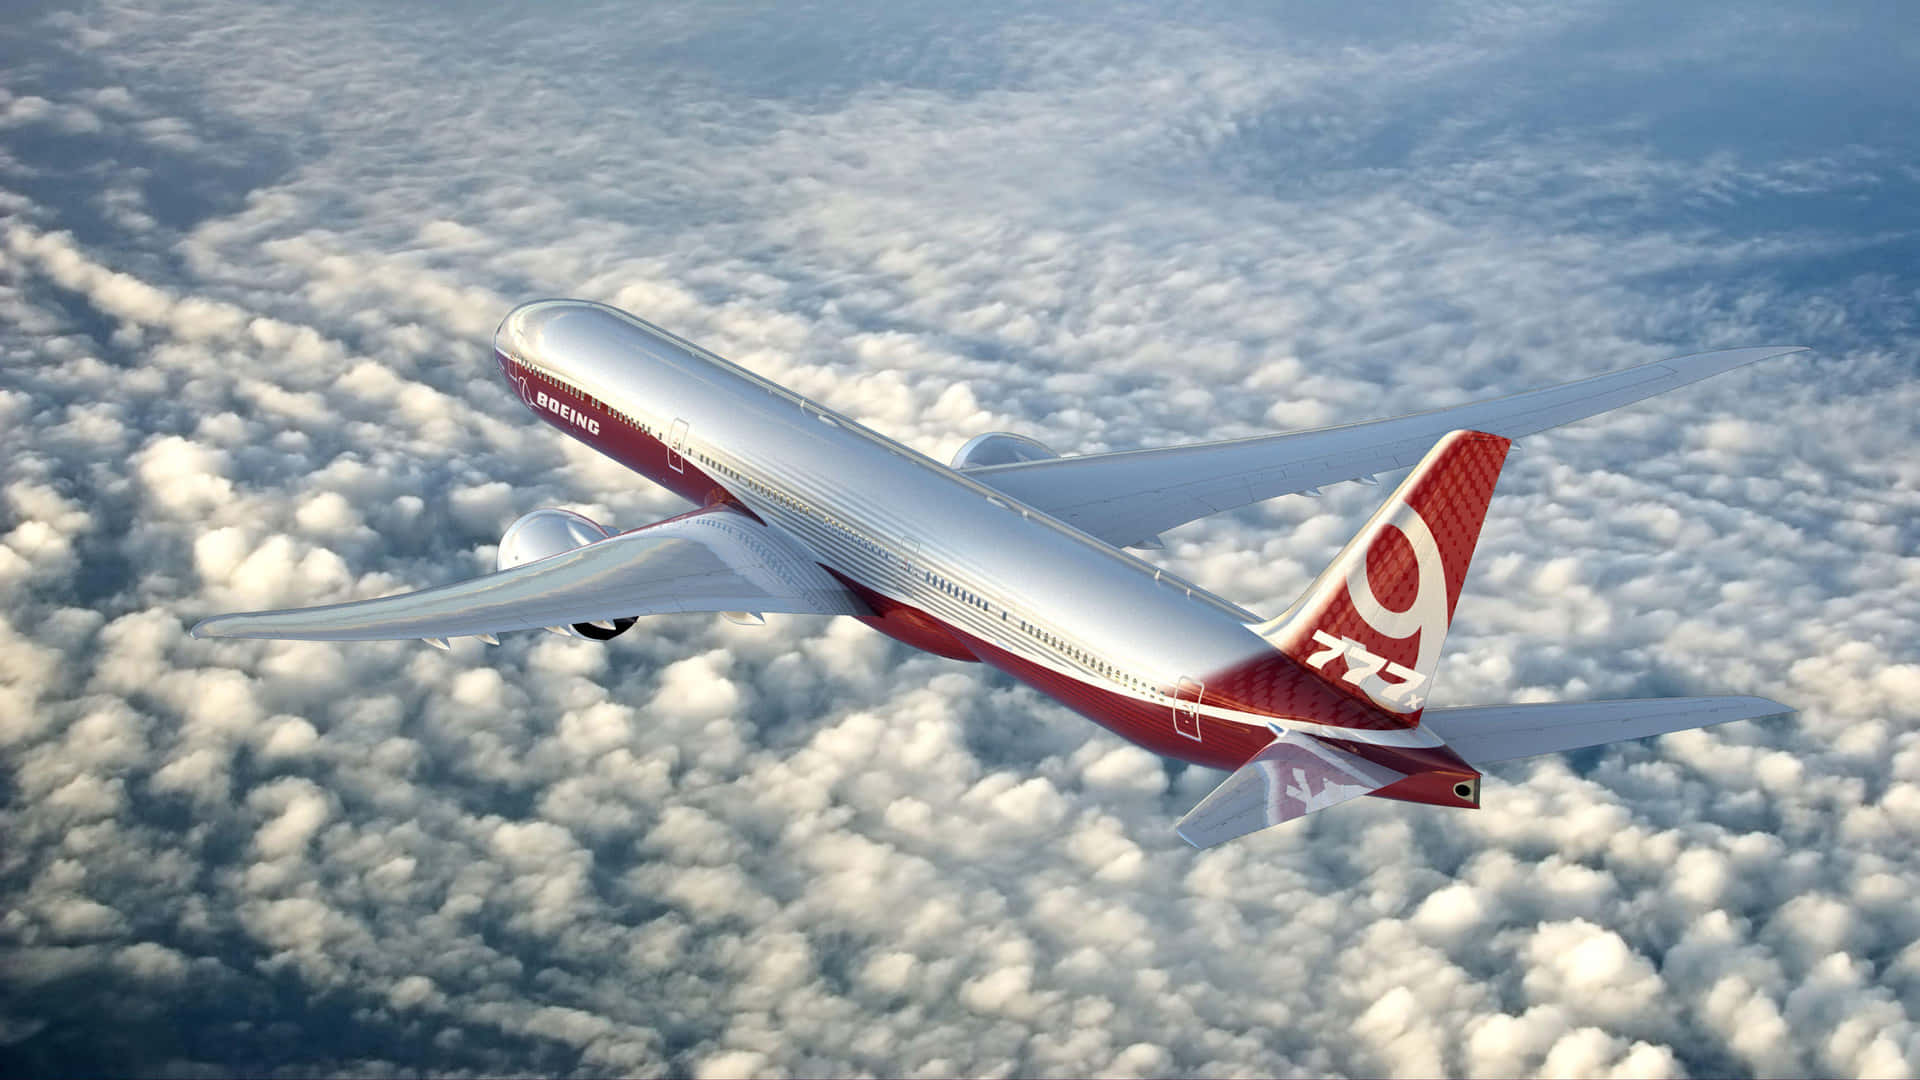 Boeing777 Flying Above Clouds Wallpaper